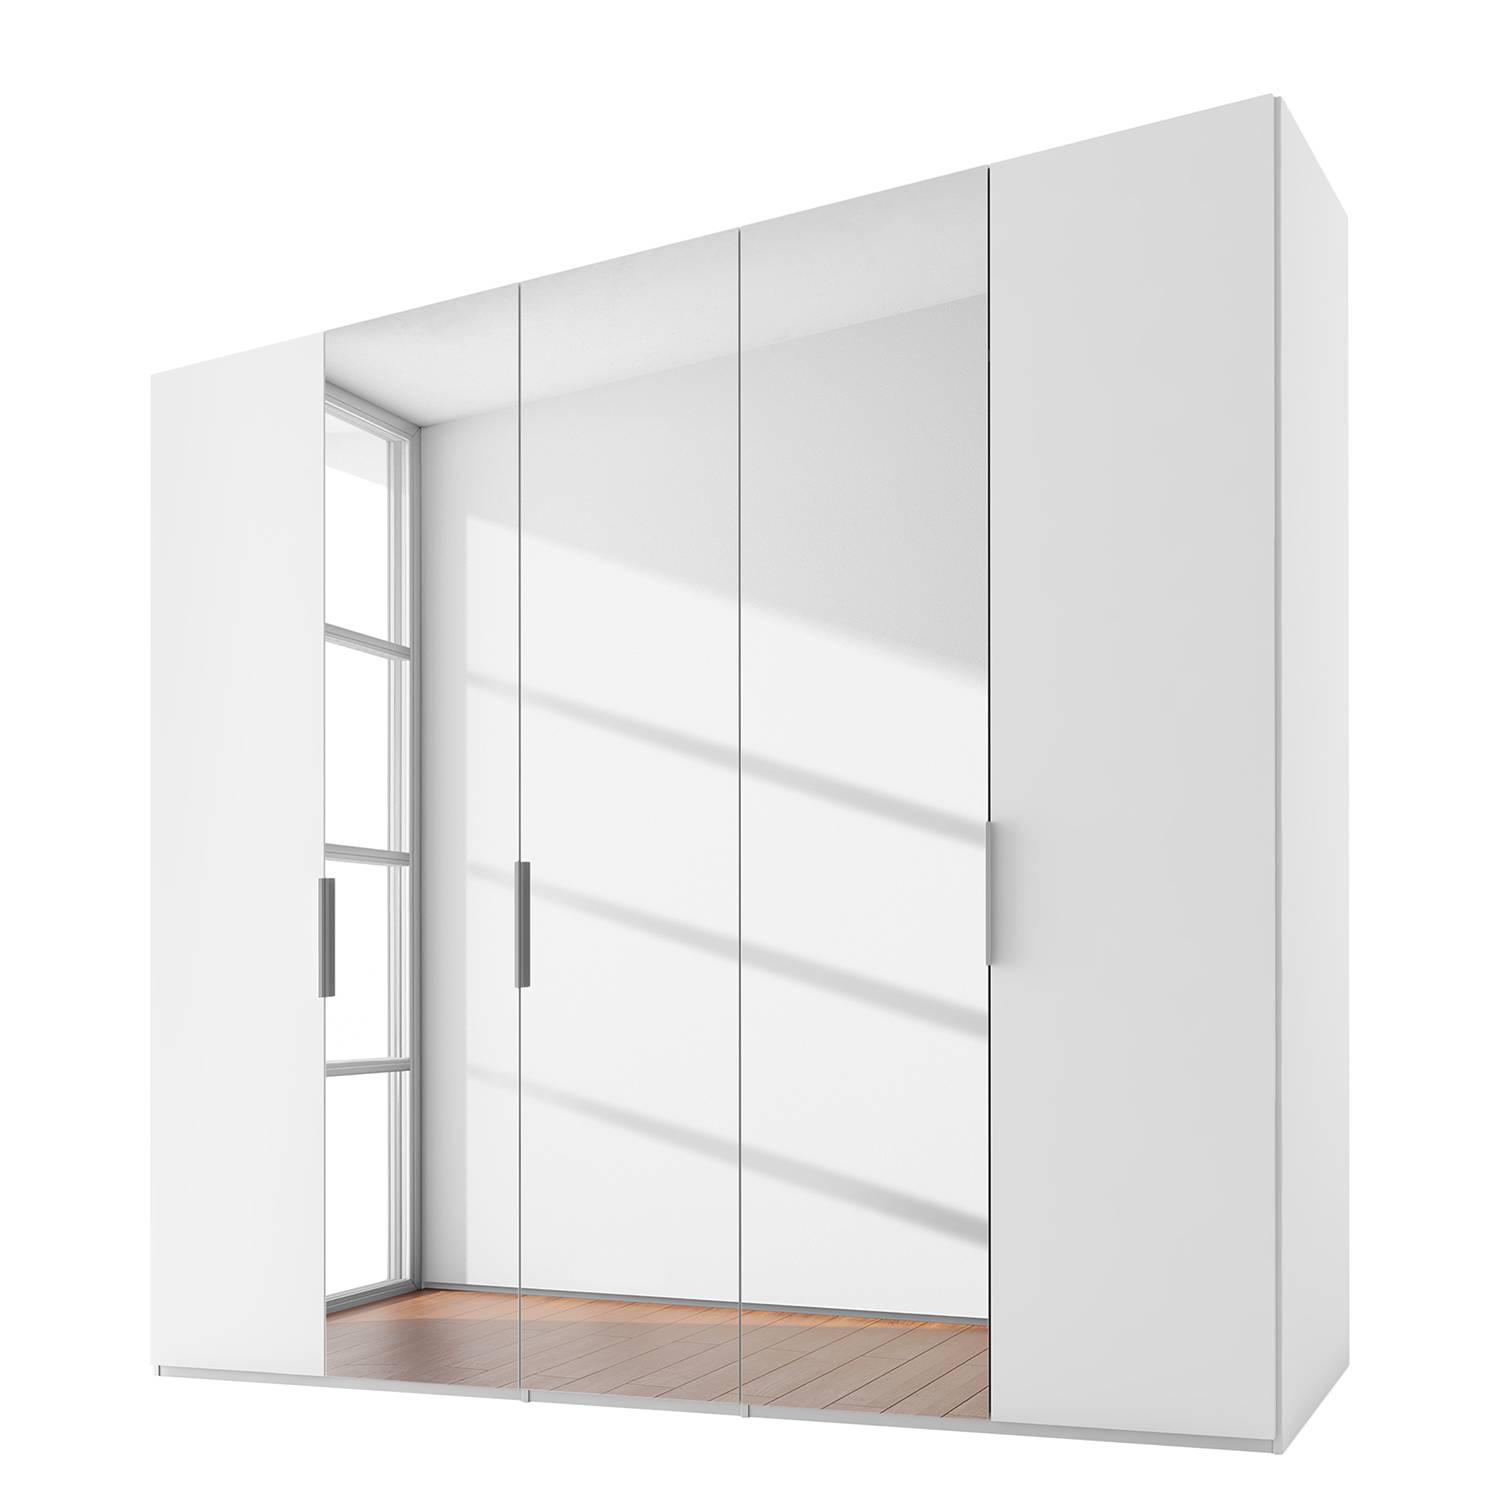 Image of Armoire One 210 000000001000224443